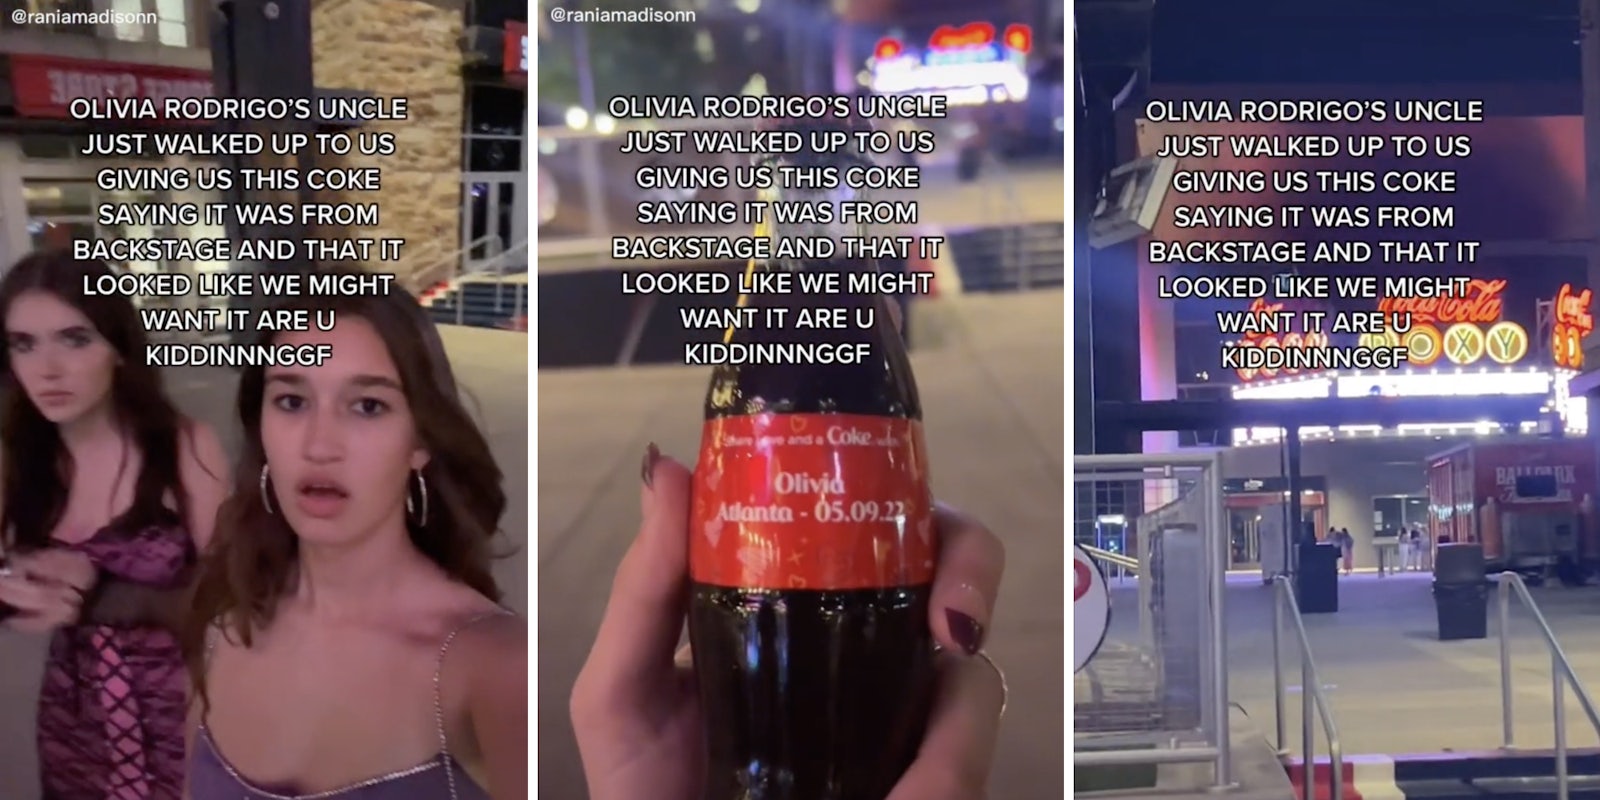 brunette woman gasping (l) bottle of coke with the name Olivia on it (c) stage entrance (r)